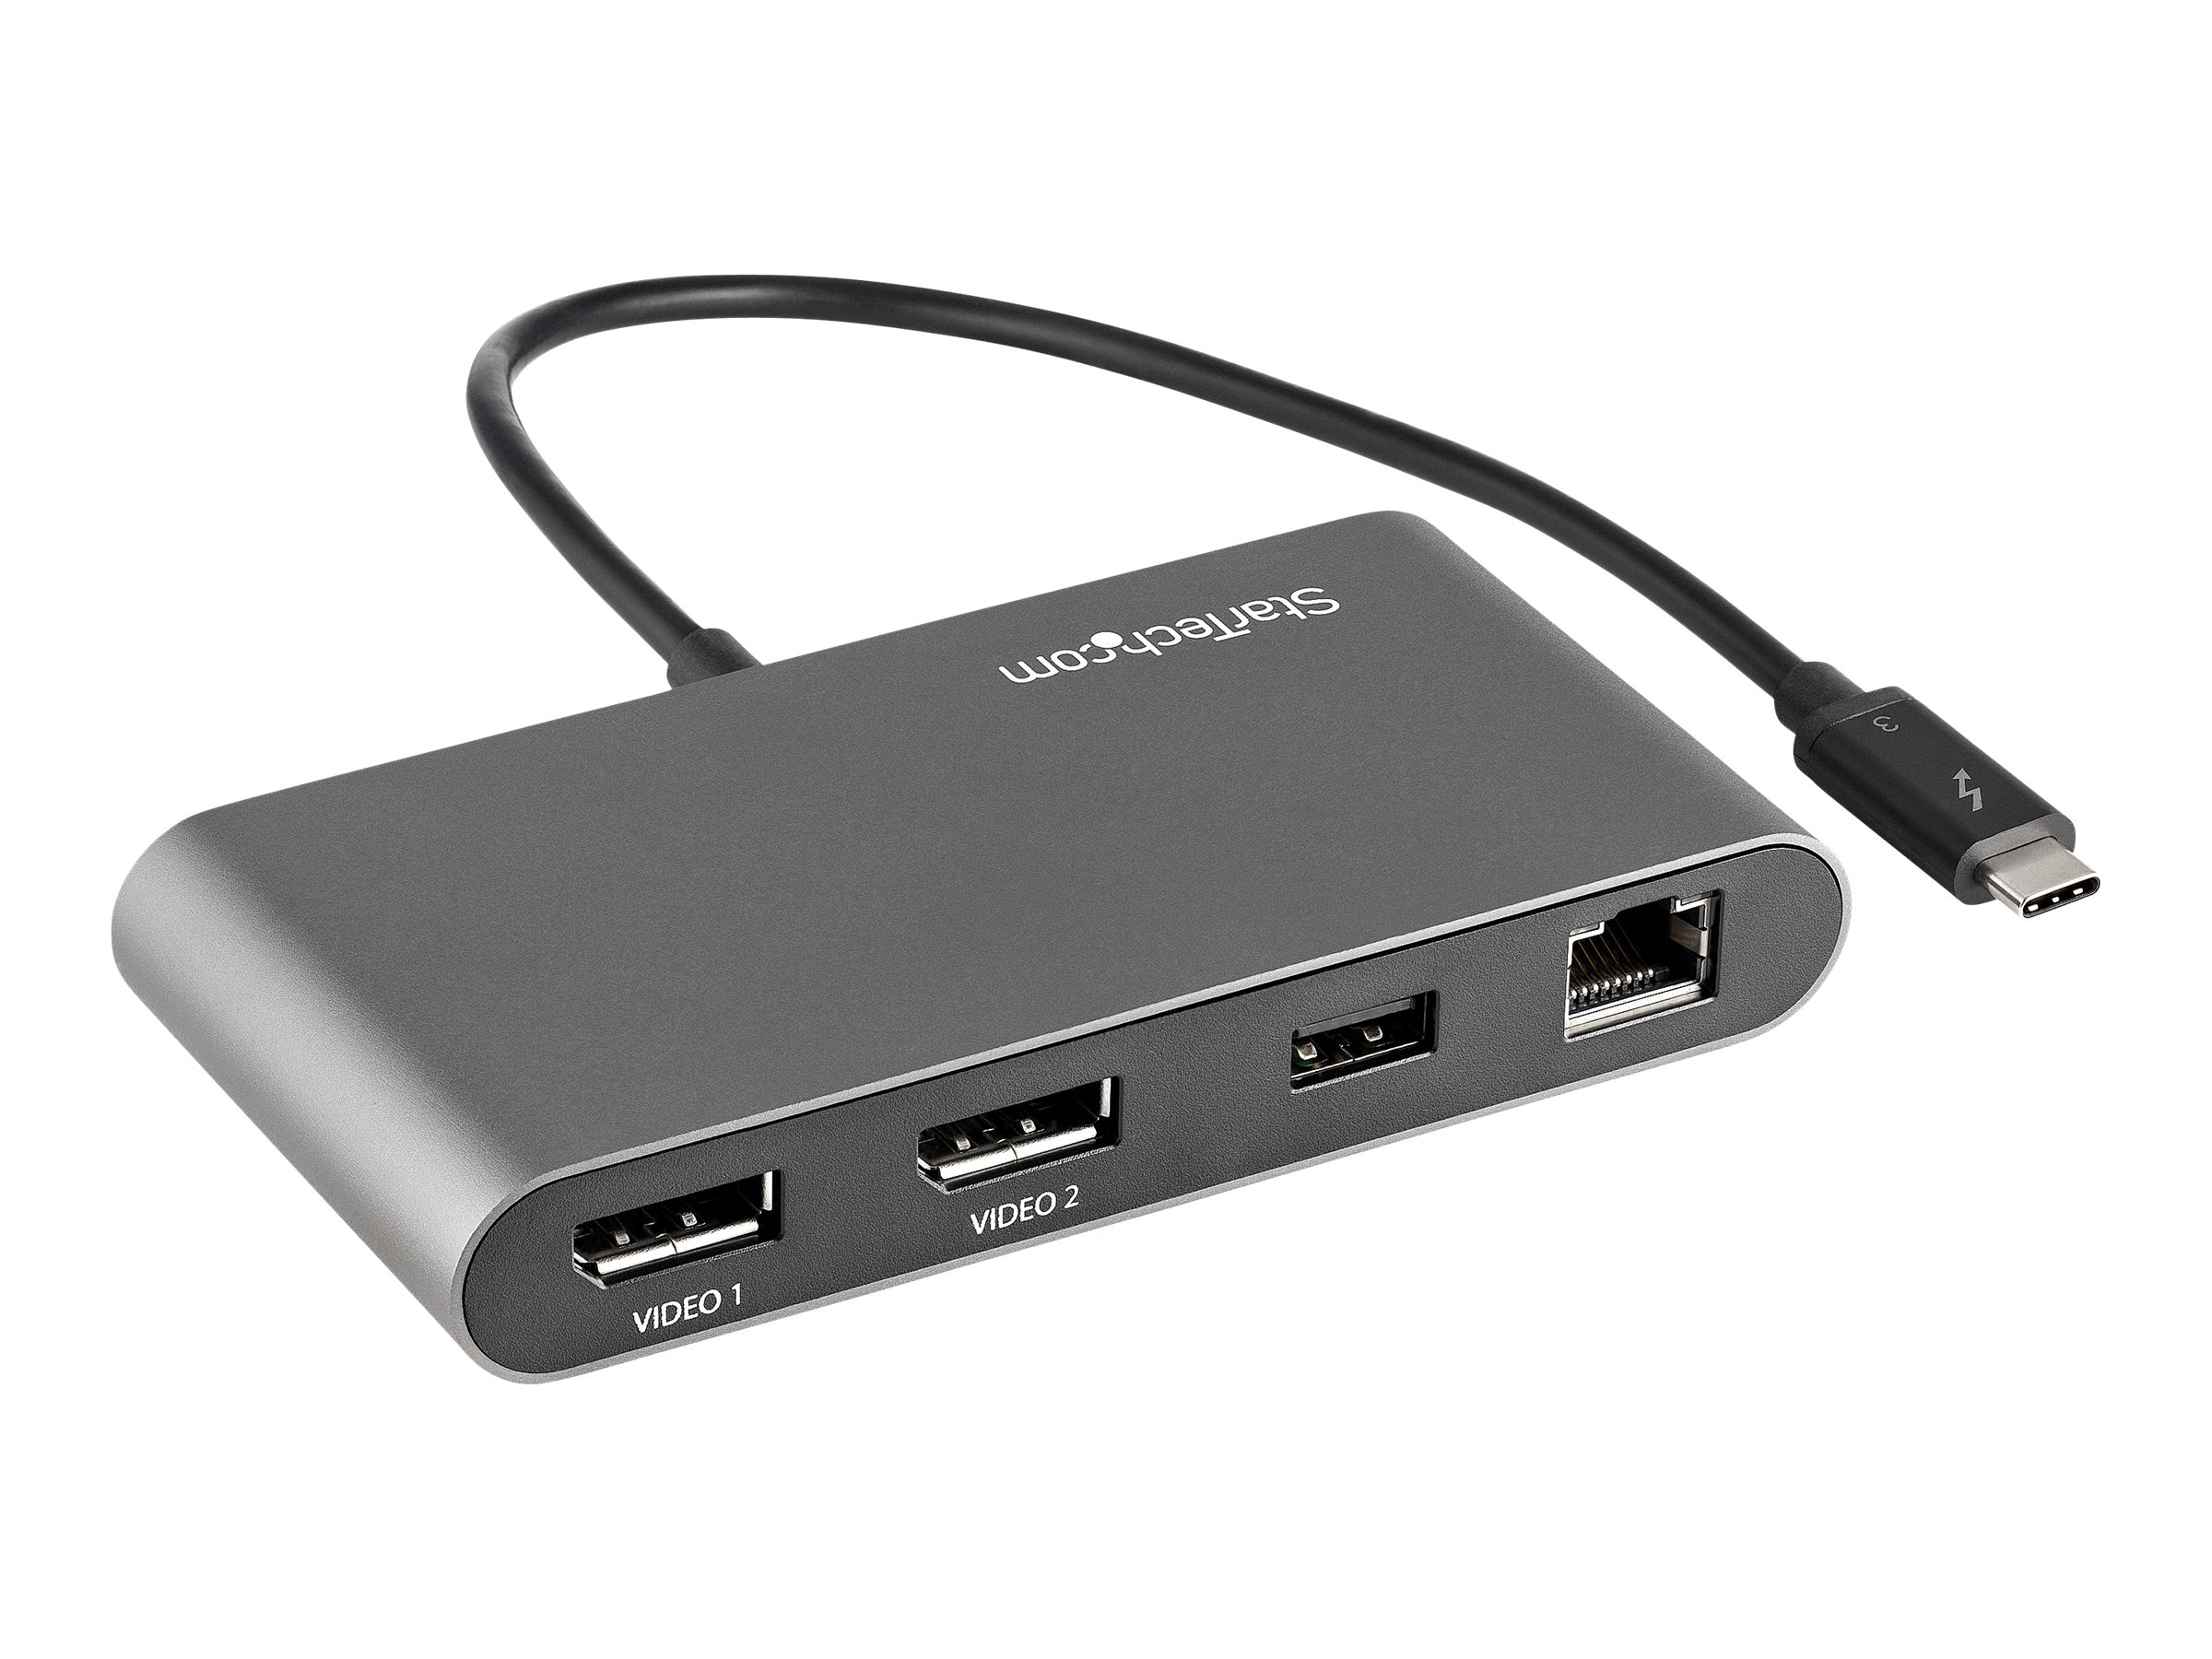 StarTech.com Thunderbolt 3 Mini Dock - Portable Dual Monitor Docking Station with DP 4K 60Hz, 1x USB-A Hub (USB 3.0/5 Gbps), GbE - 11in/28cm Cable - TB3 Multiport Adapter - Mac/Windows